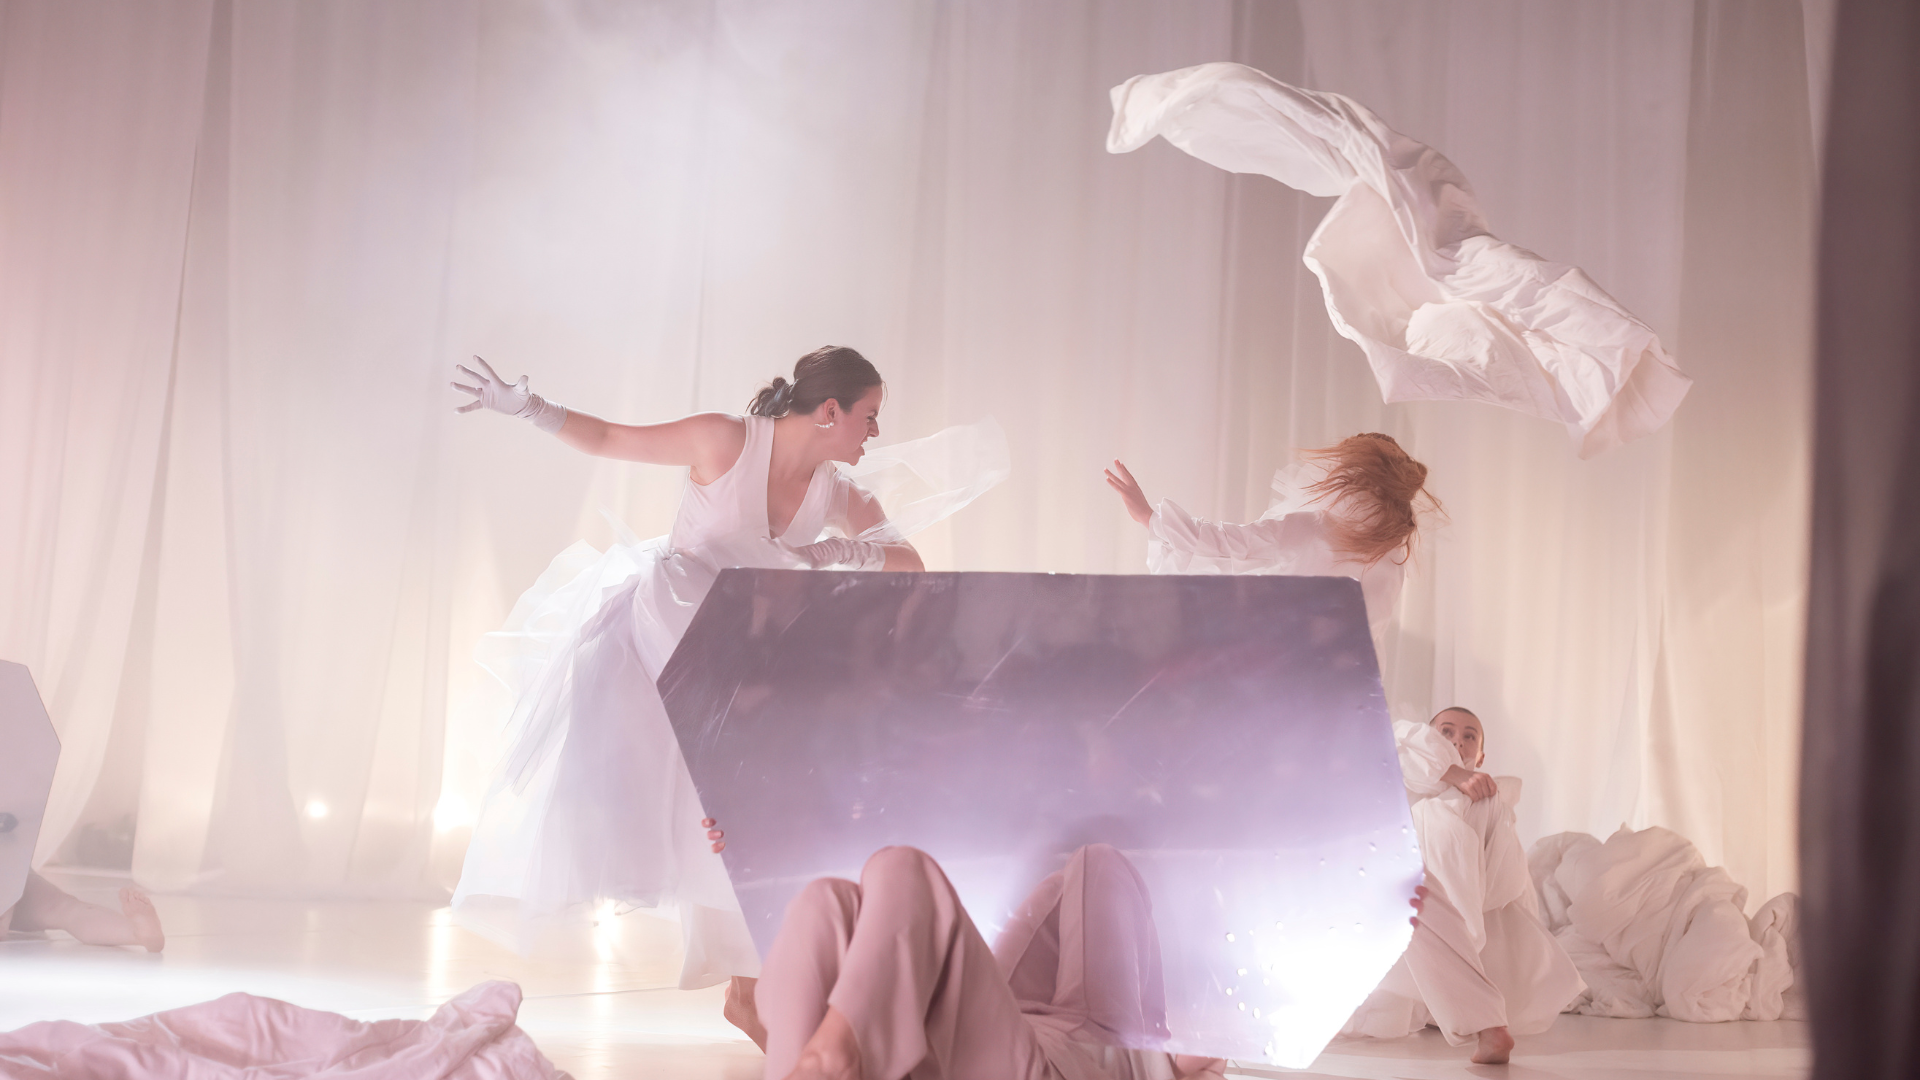 White fabric floats in the air as a dancer moves and gestures to the sky. She is also dressed in a flowing white costume.